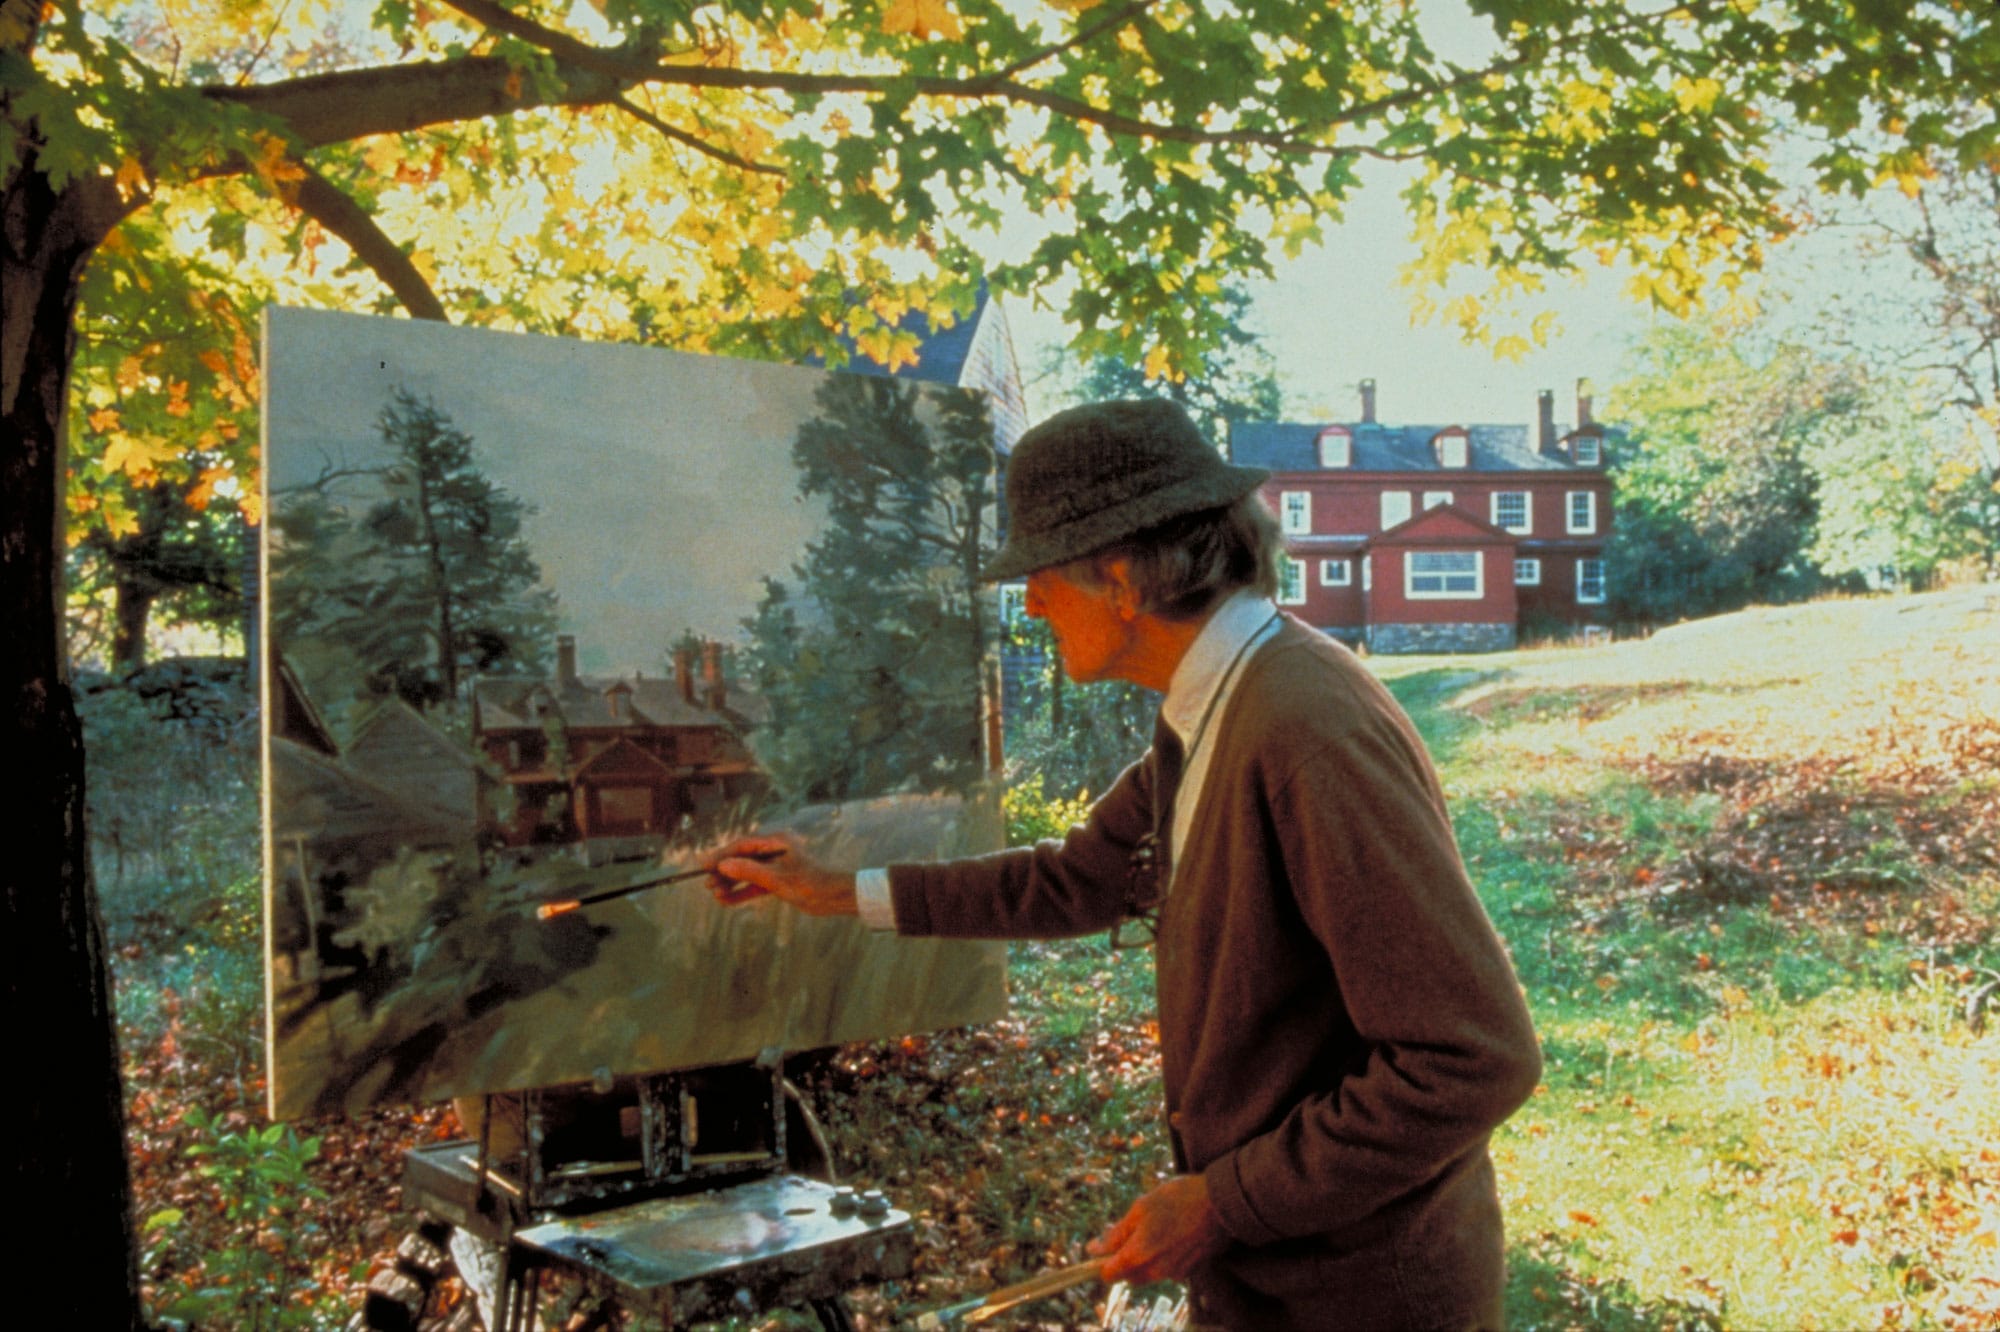 A man is painting in front of a house.